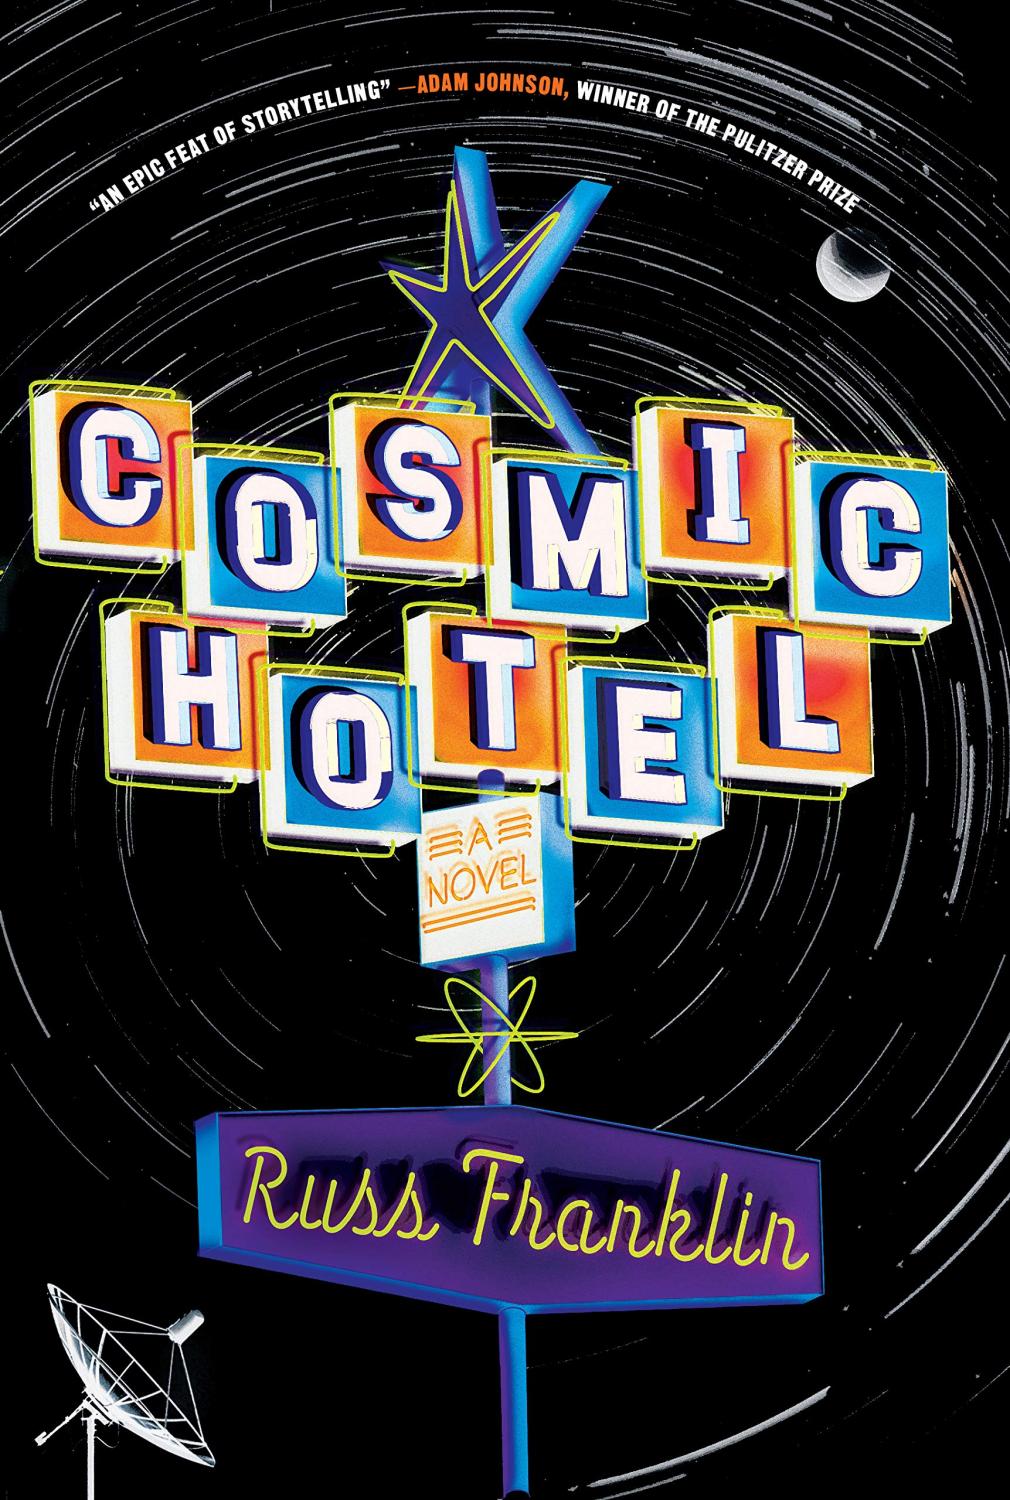 Russ Franklin's Cosmic Hotel Book Cover